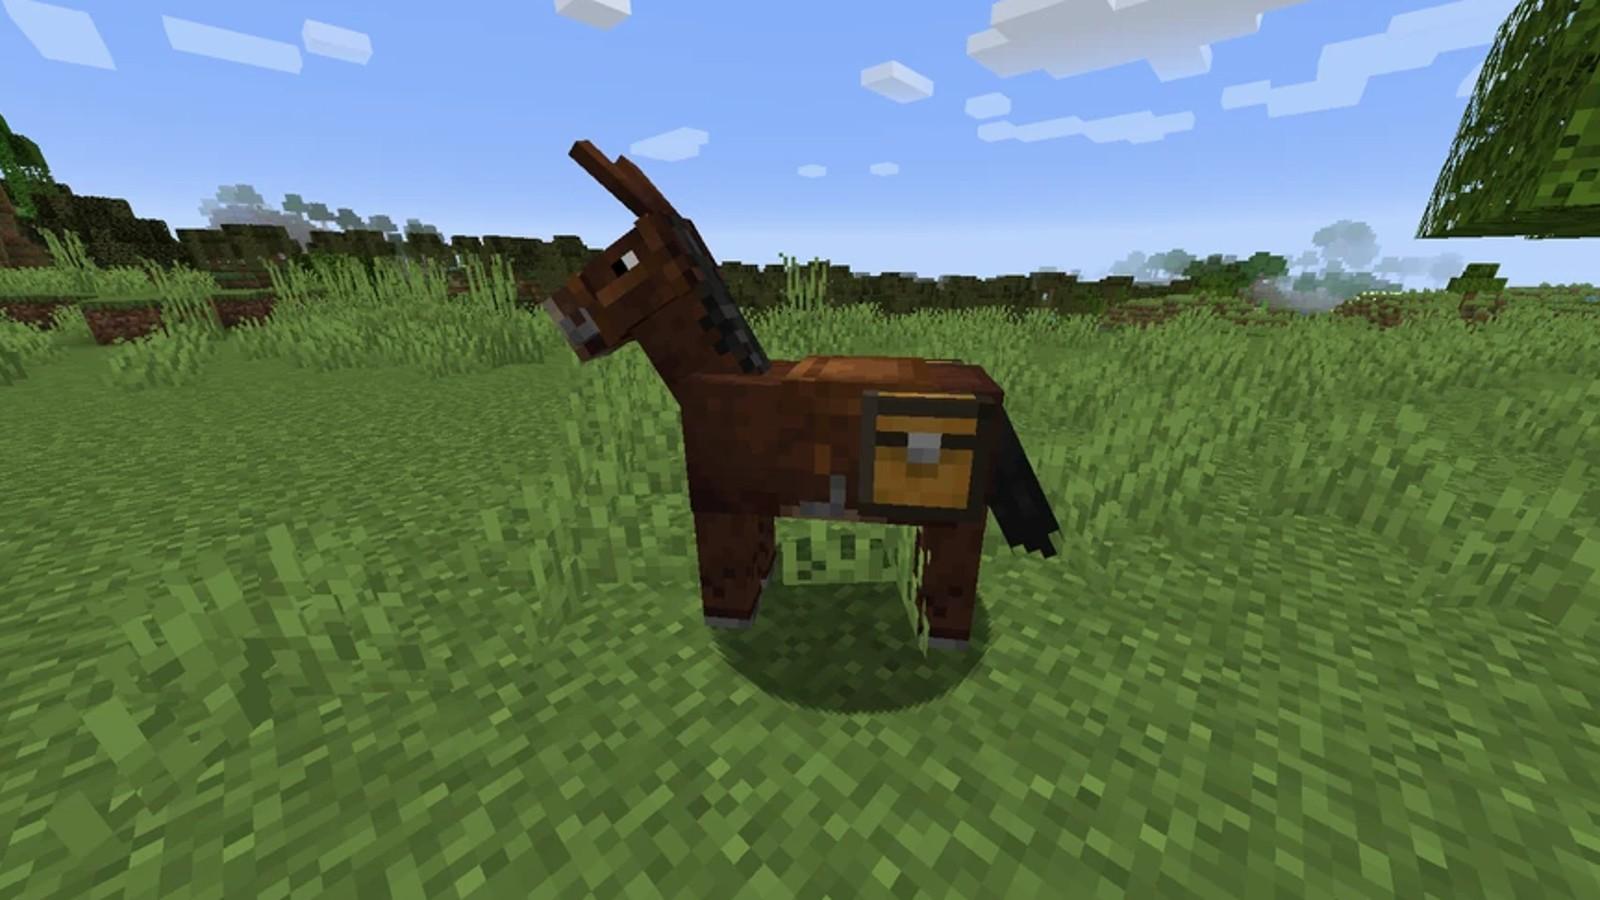 An image of a horse with a saddle in Minecraft.